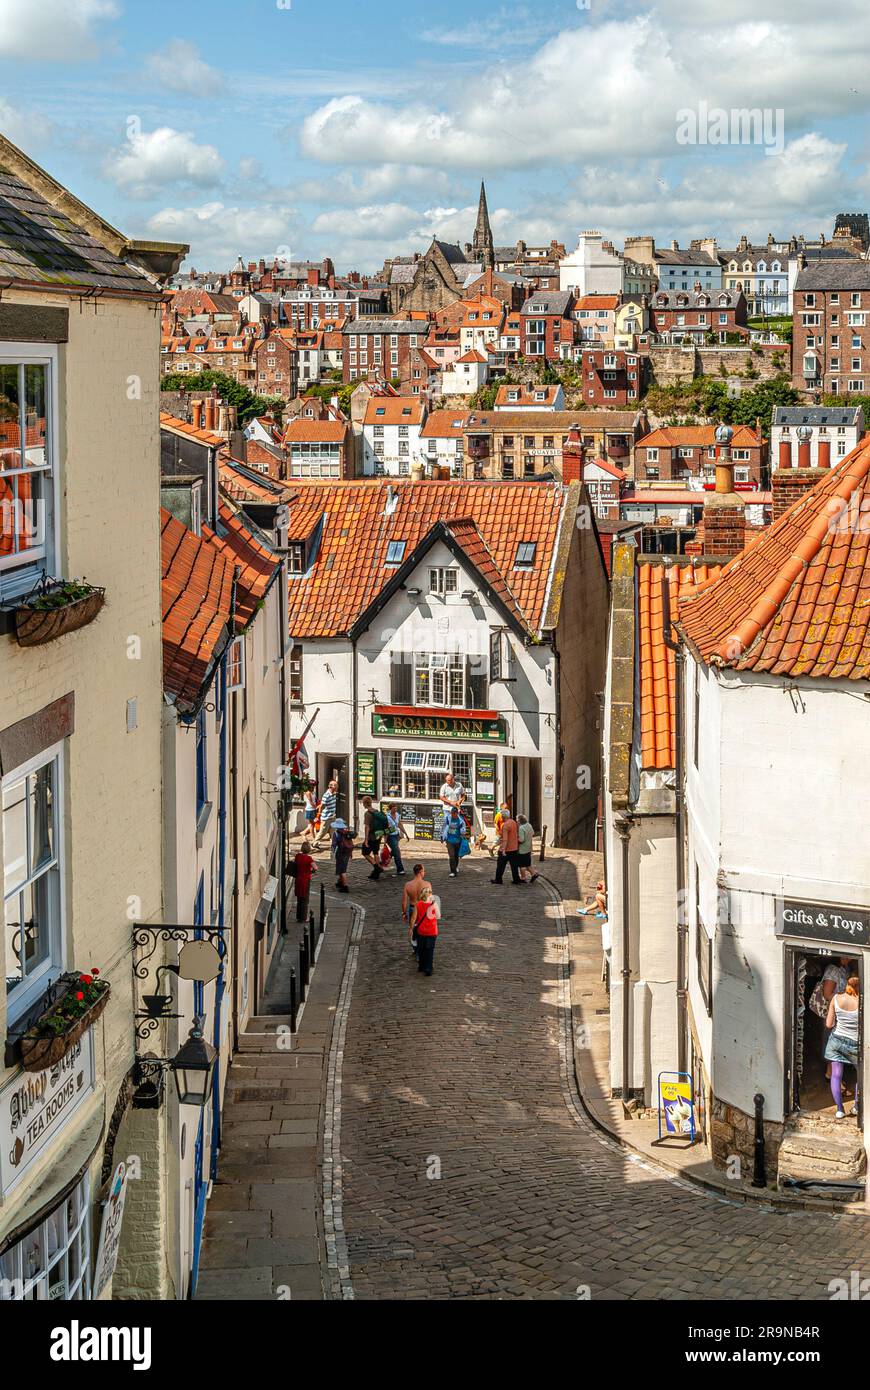 Elevated view over old town of Whitby, North Yorkshire, England, UK Stock Photo